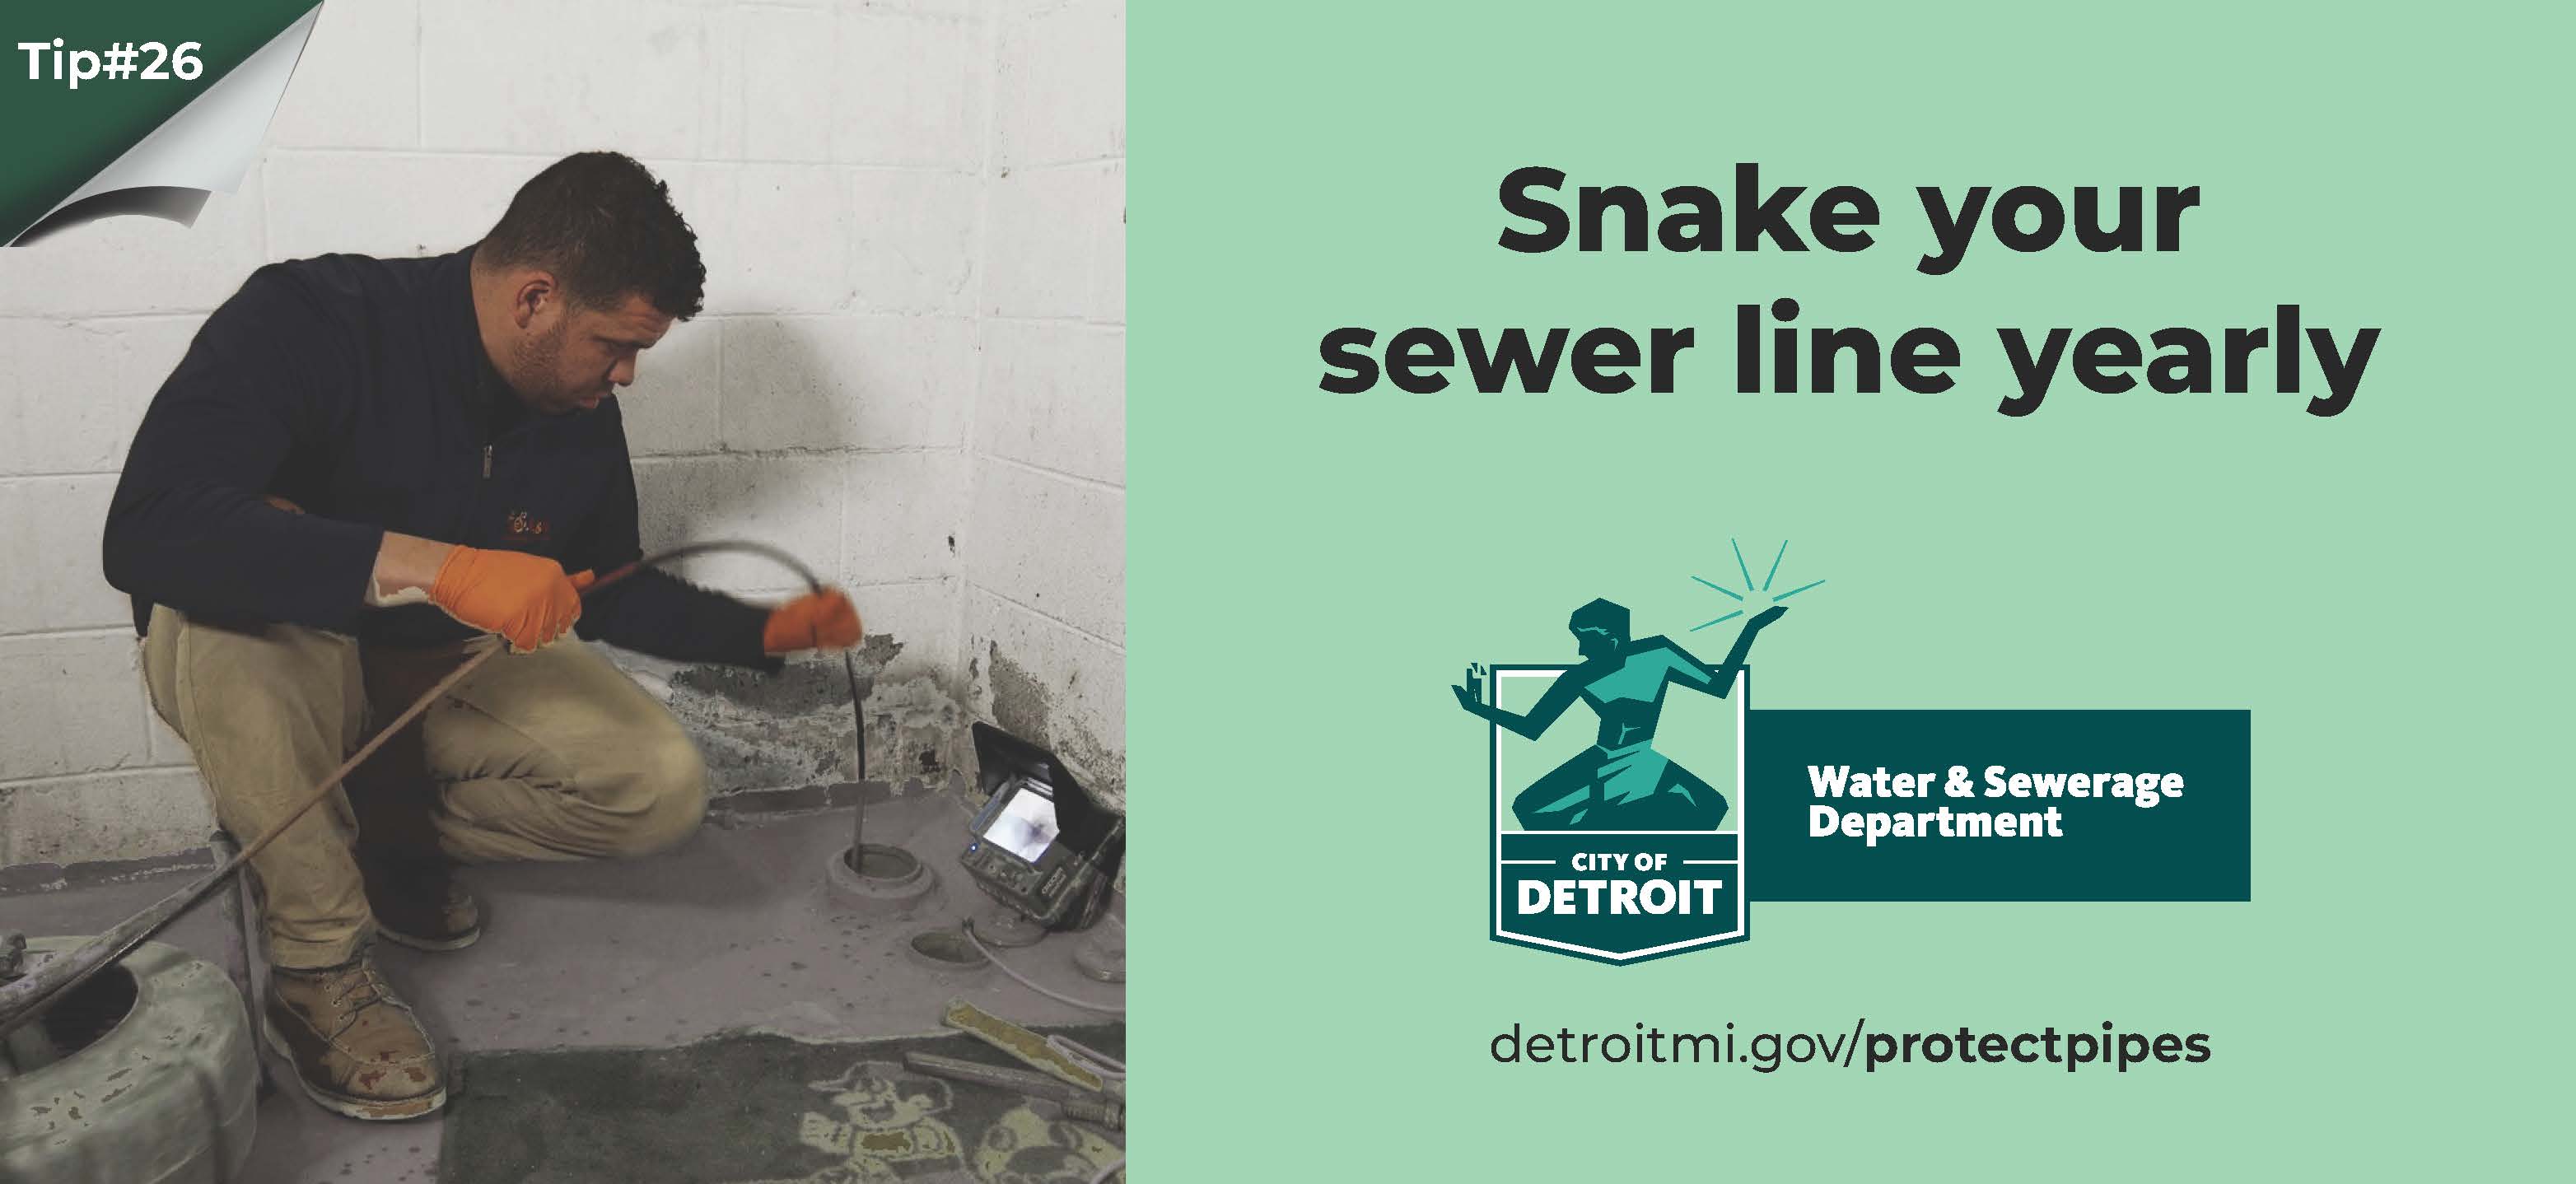 Snake your sewer line yearly